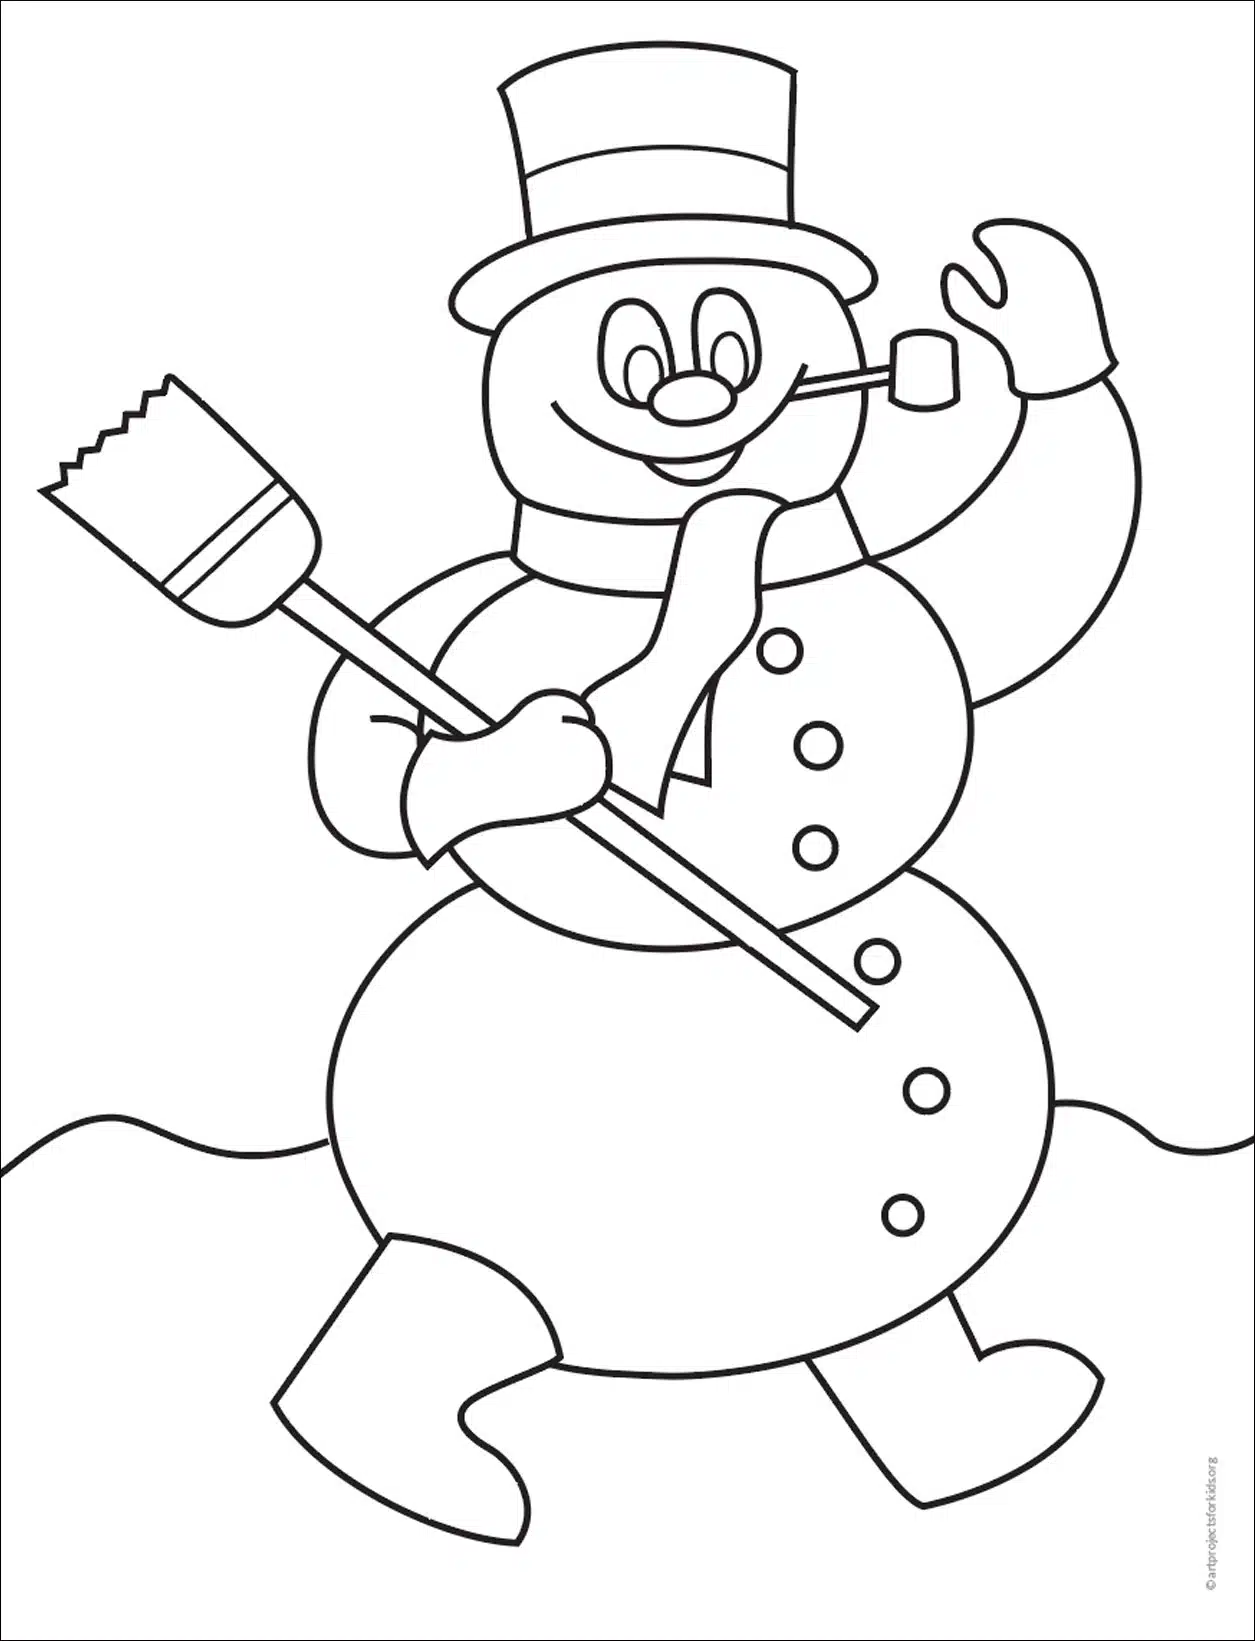 How to Draw a Easy Snowman - Step by Step Instructions